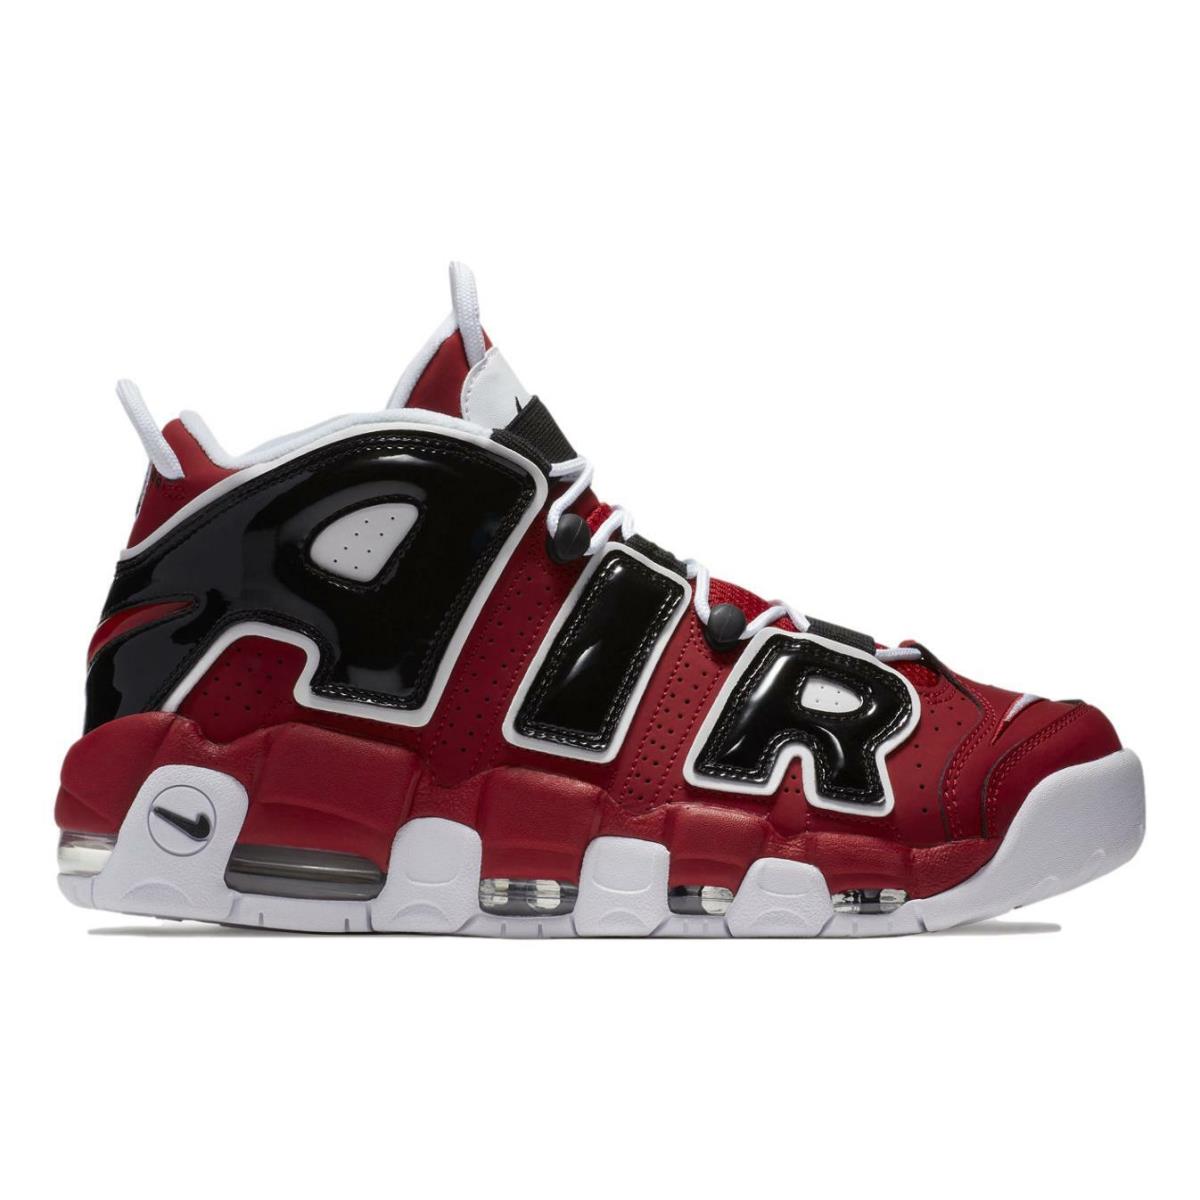 Nike shoes Air More Uptempo - Varsity Red/White-Black 1